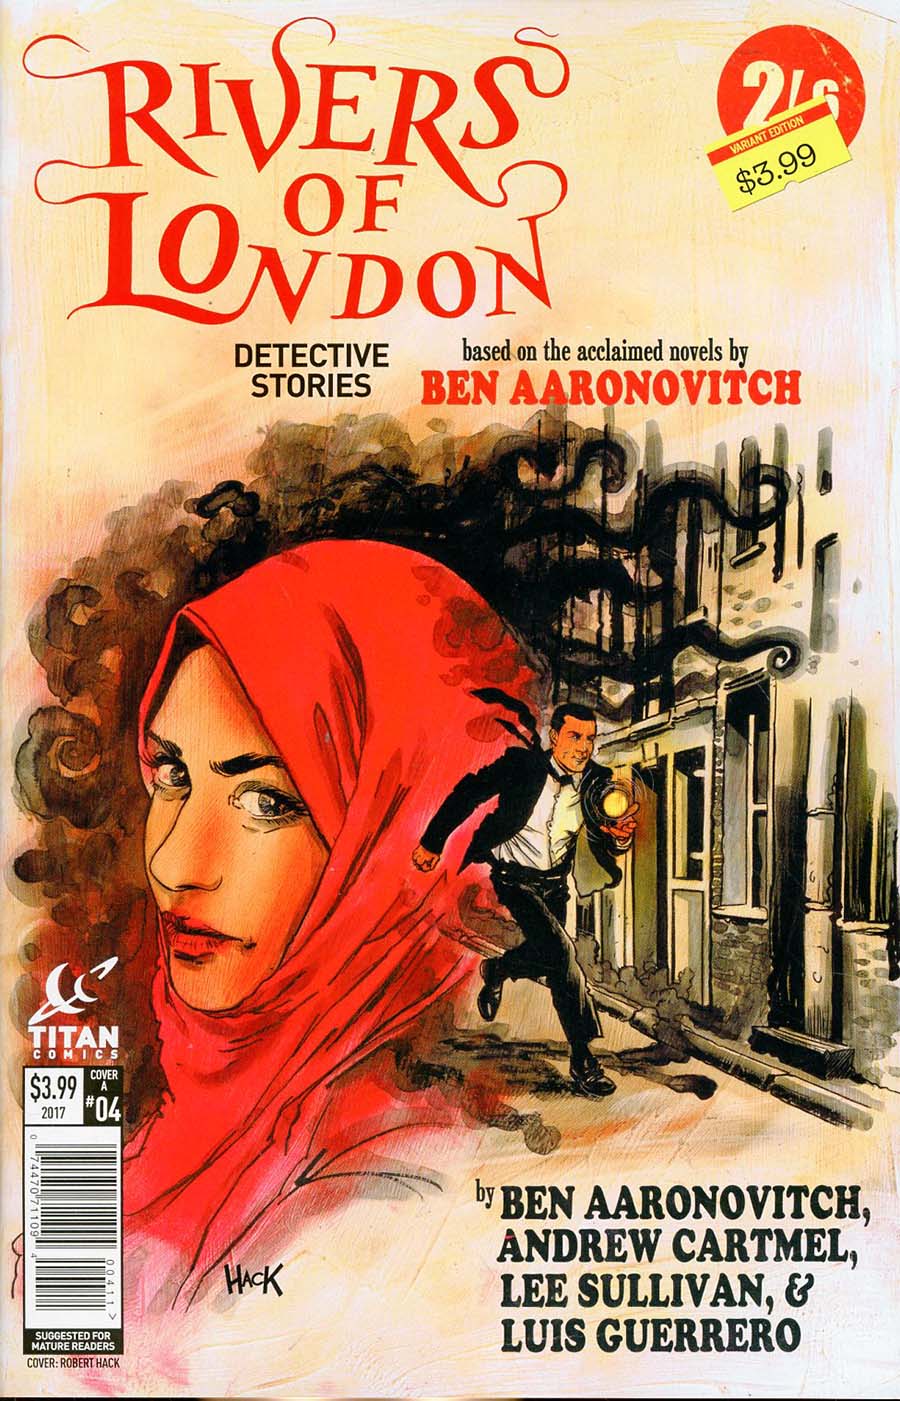 Rivers Of London Detective Stories #4